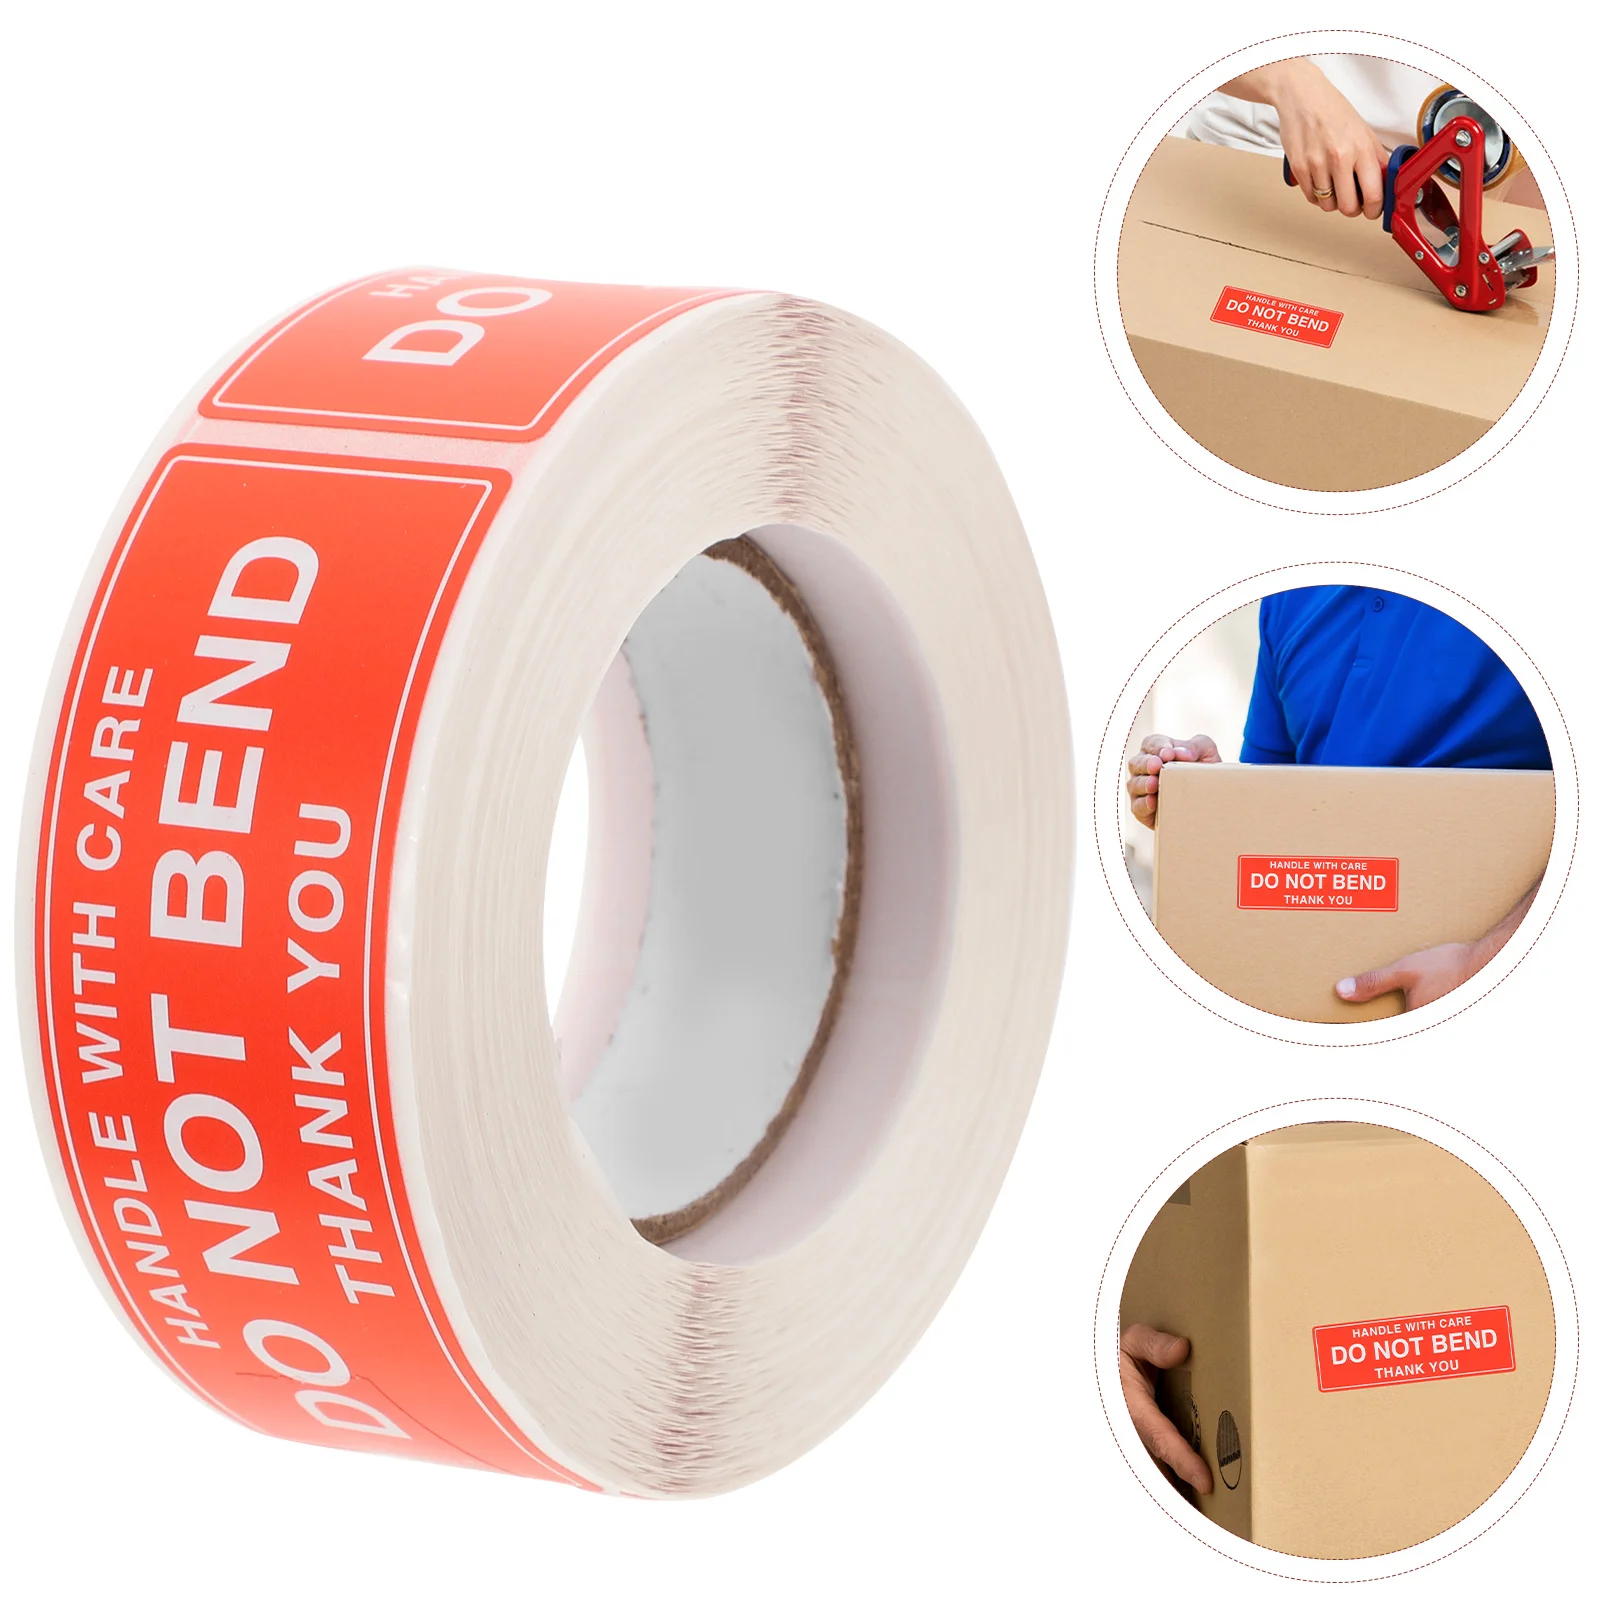 

Do Not Bend The Label Packing Stickers Shipping Warning Package Labels Decals Caution Adhesive Care Red Tags